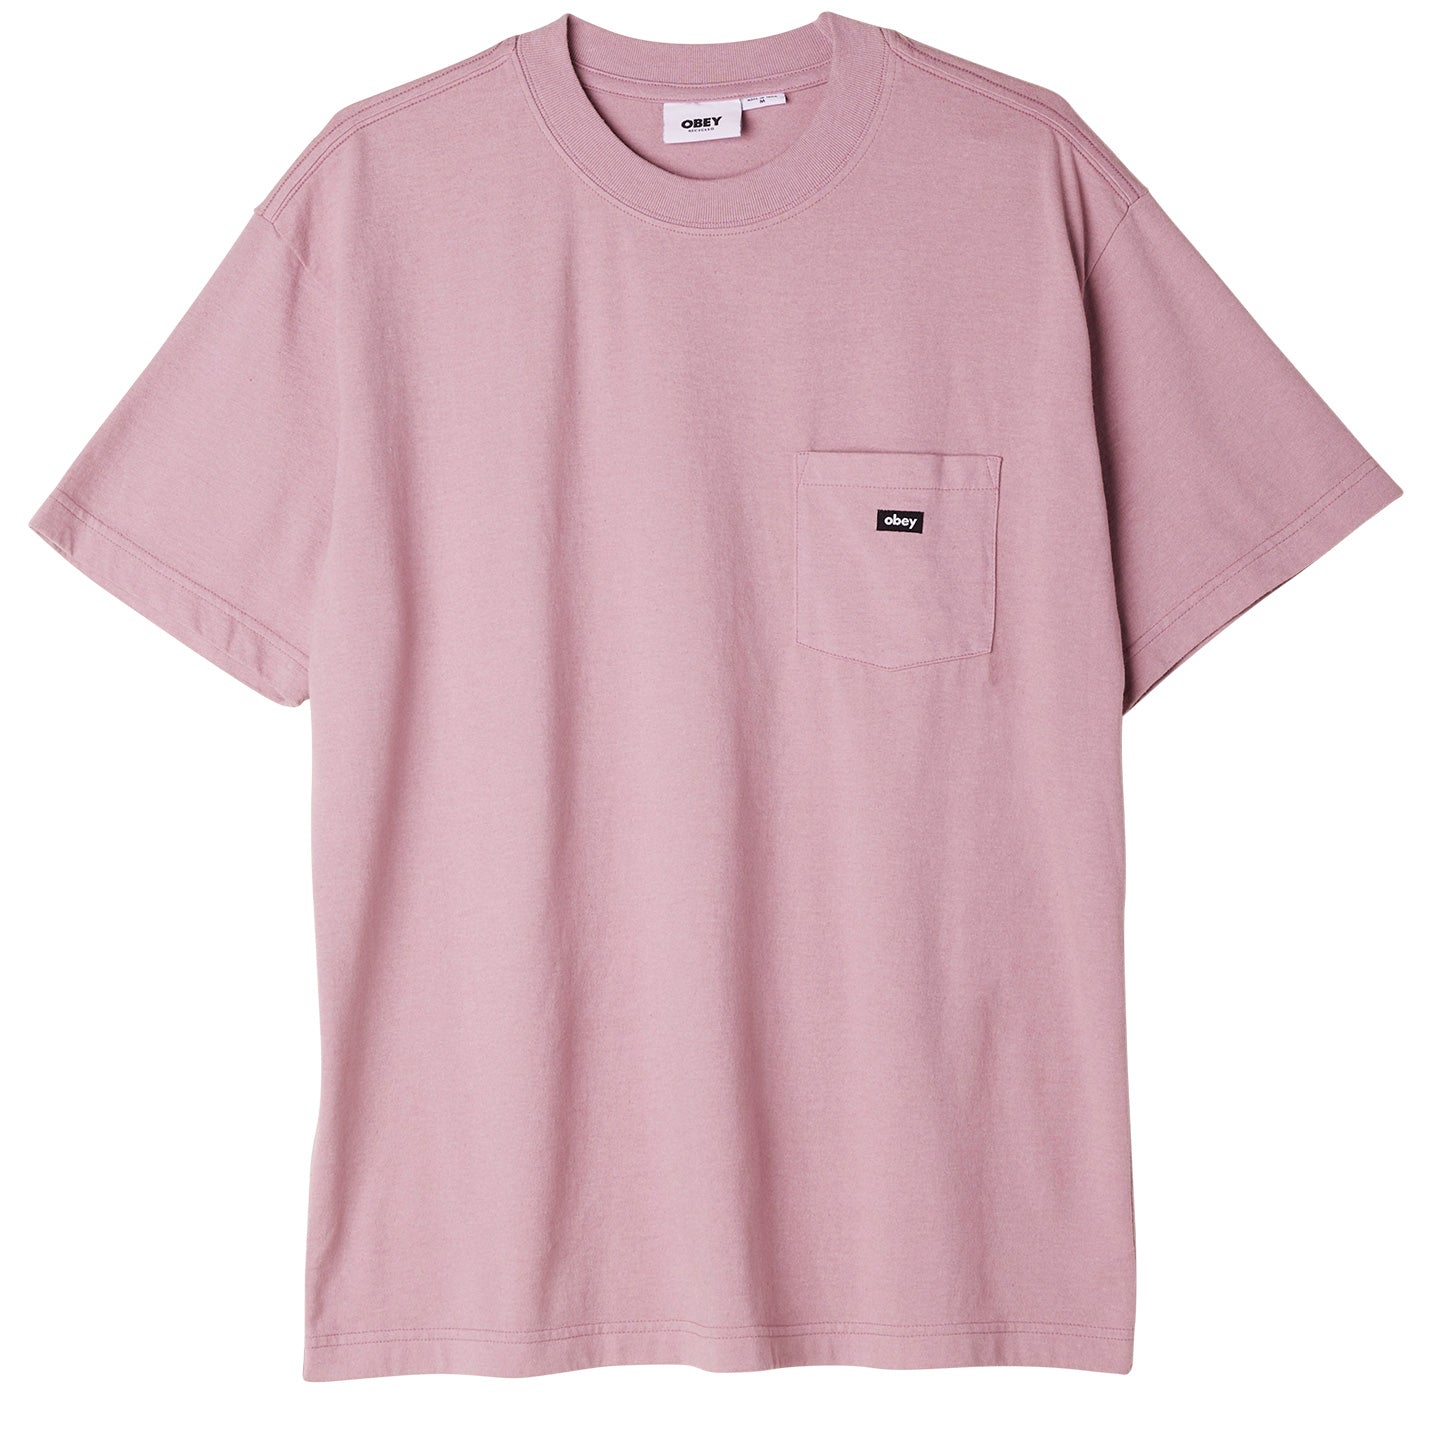 OBEY Timeless Recycled Pocket T-Shirt